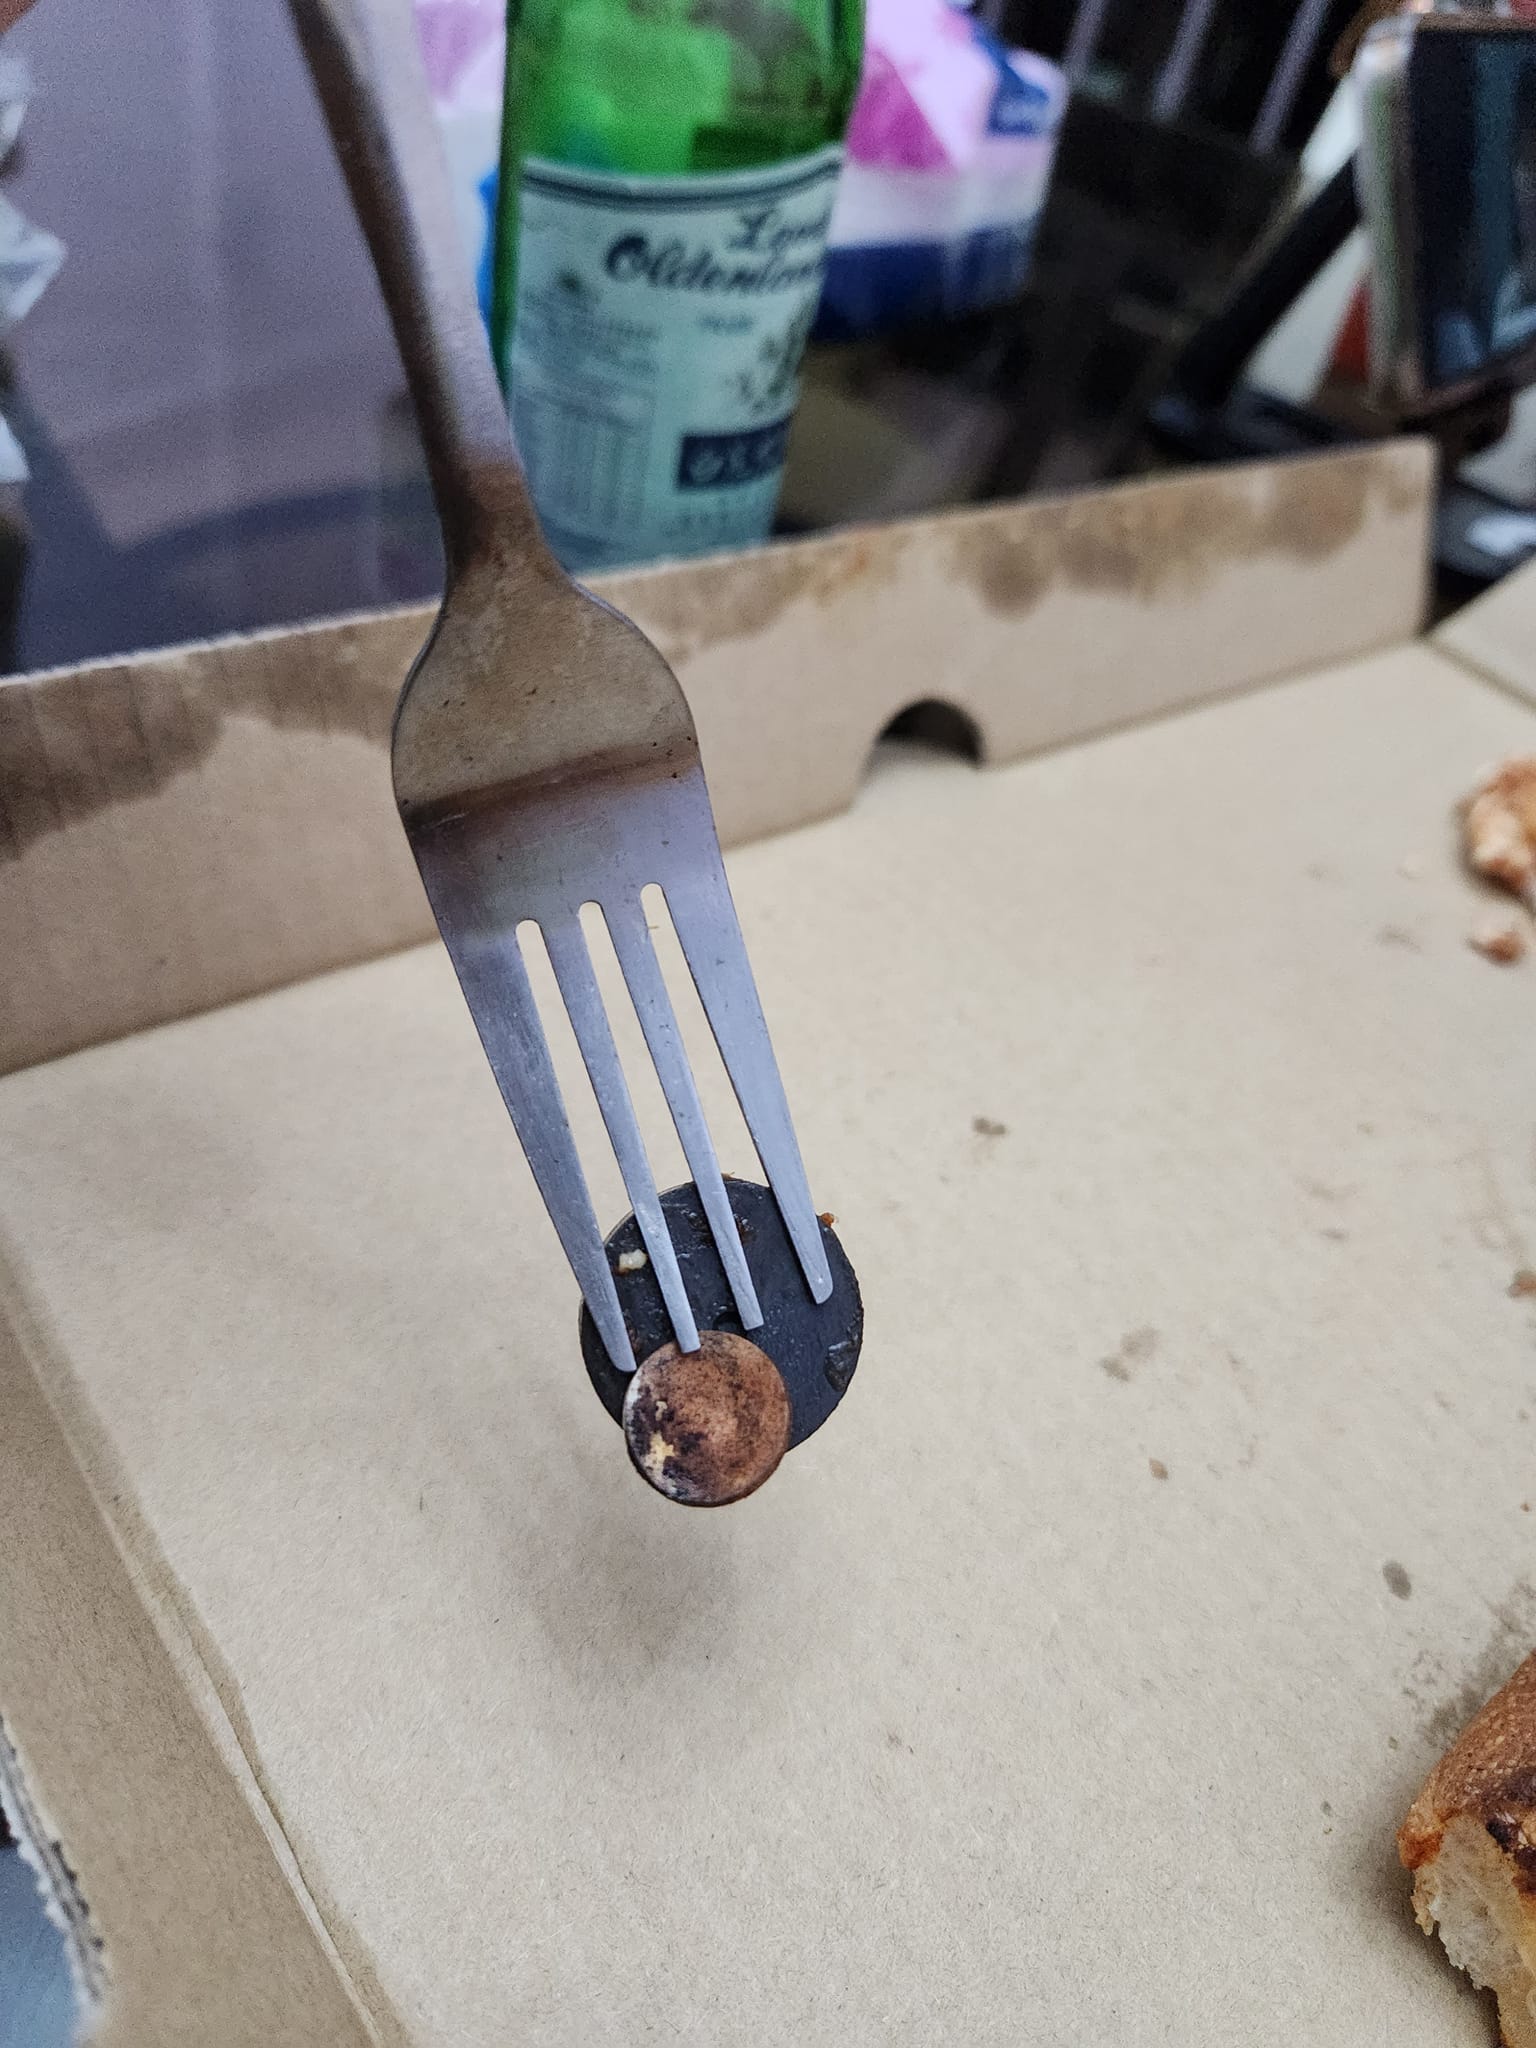 The magnet attached to the metal fork